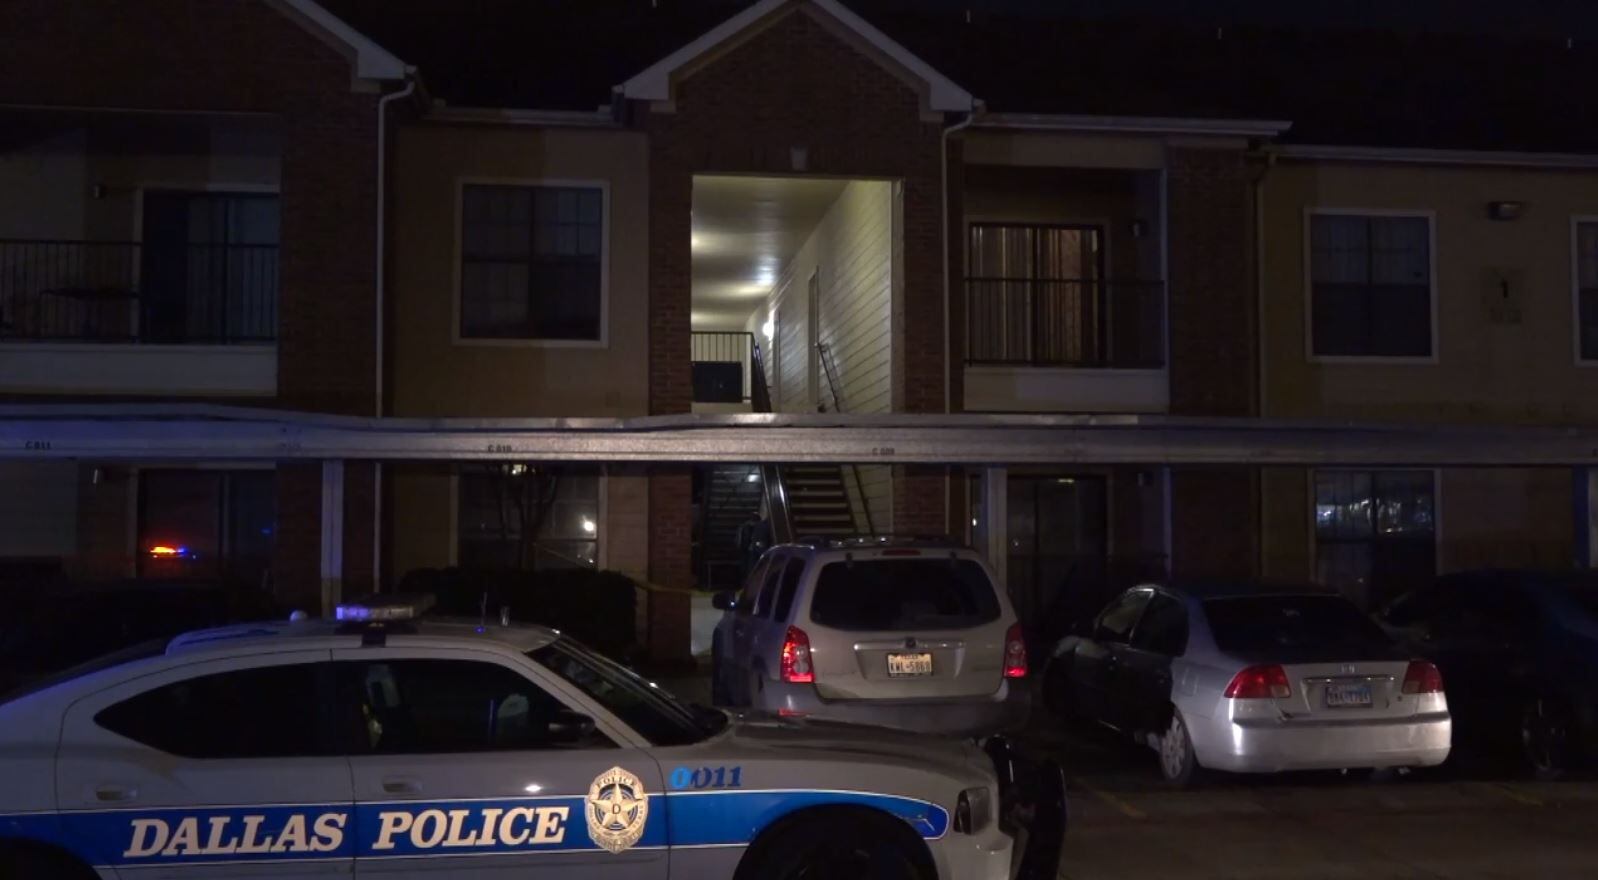 Police found the woman shot to death after conducting a welfare check at the apartment on North Masters Drive.